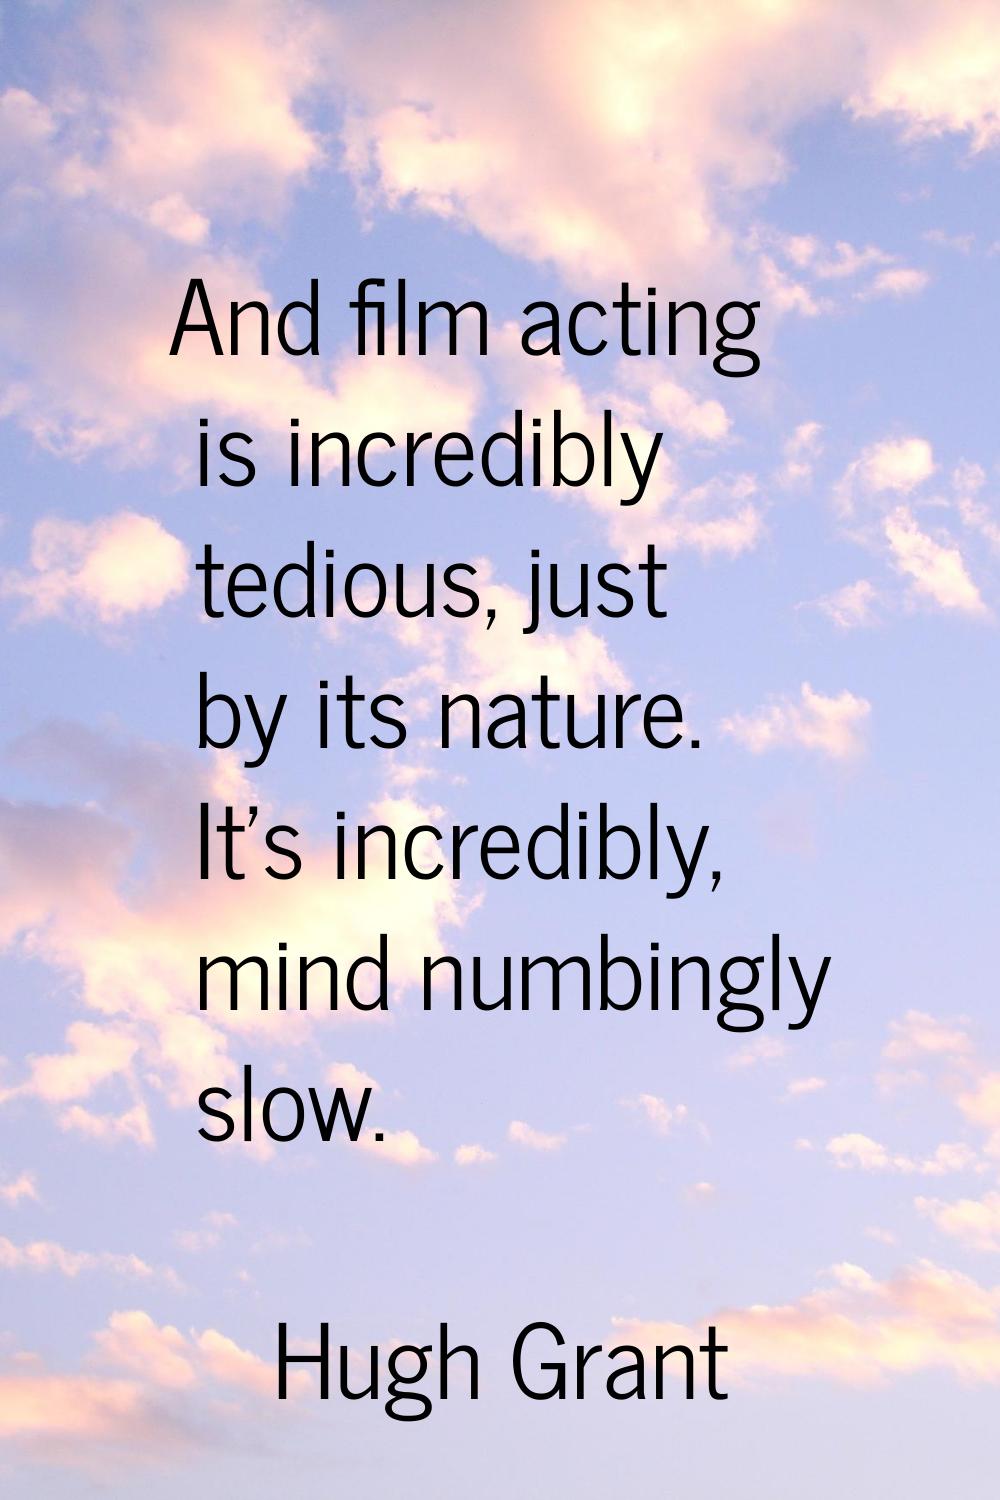 And film acting is incredibly tedious, just by its nature. It's incredibly, mind numbingly slow.